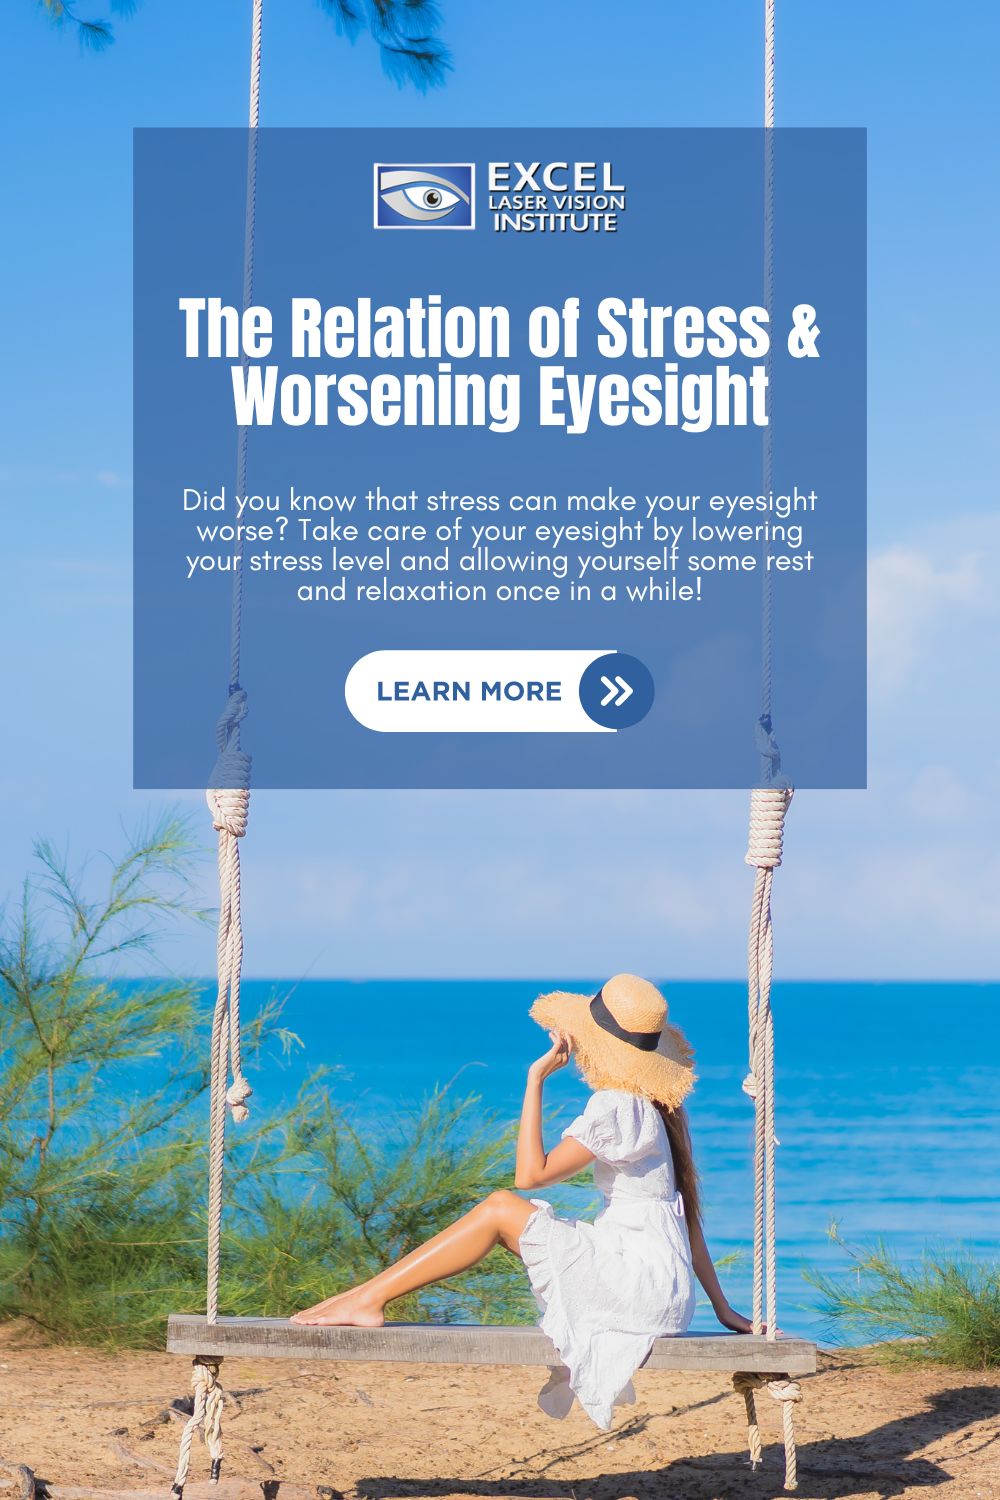 woman-on-the-swing-blog-title-The-Relation-of-Stress-and-Worsening-Eyesight-Pinterest-Pin